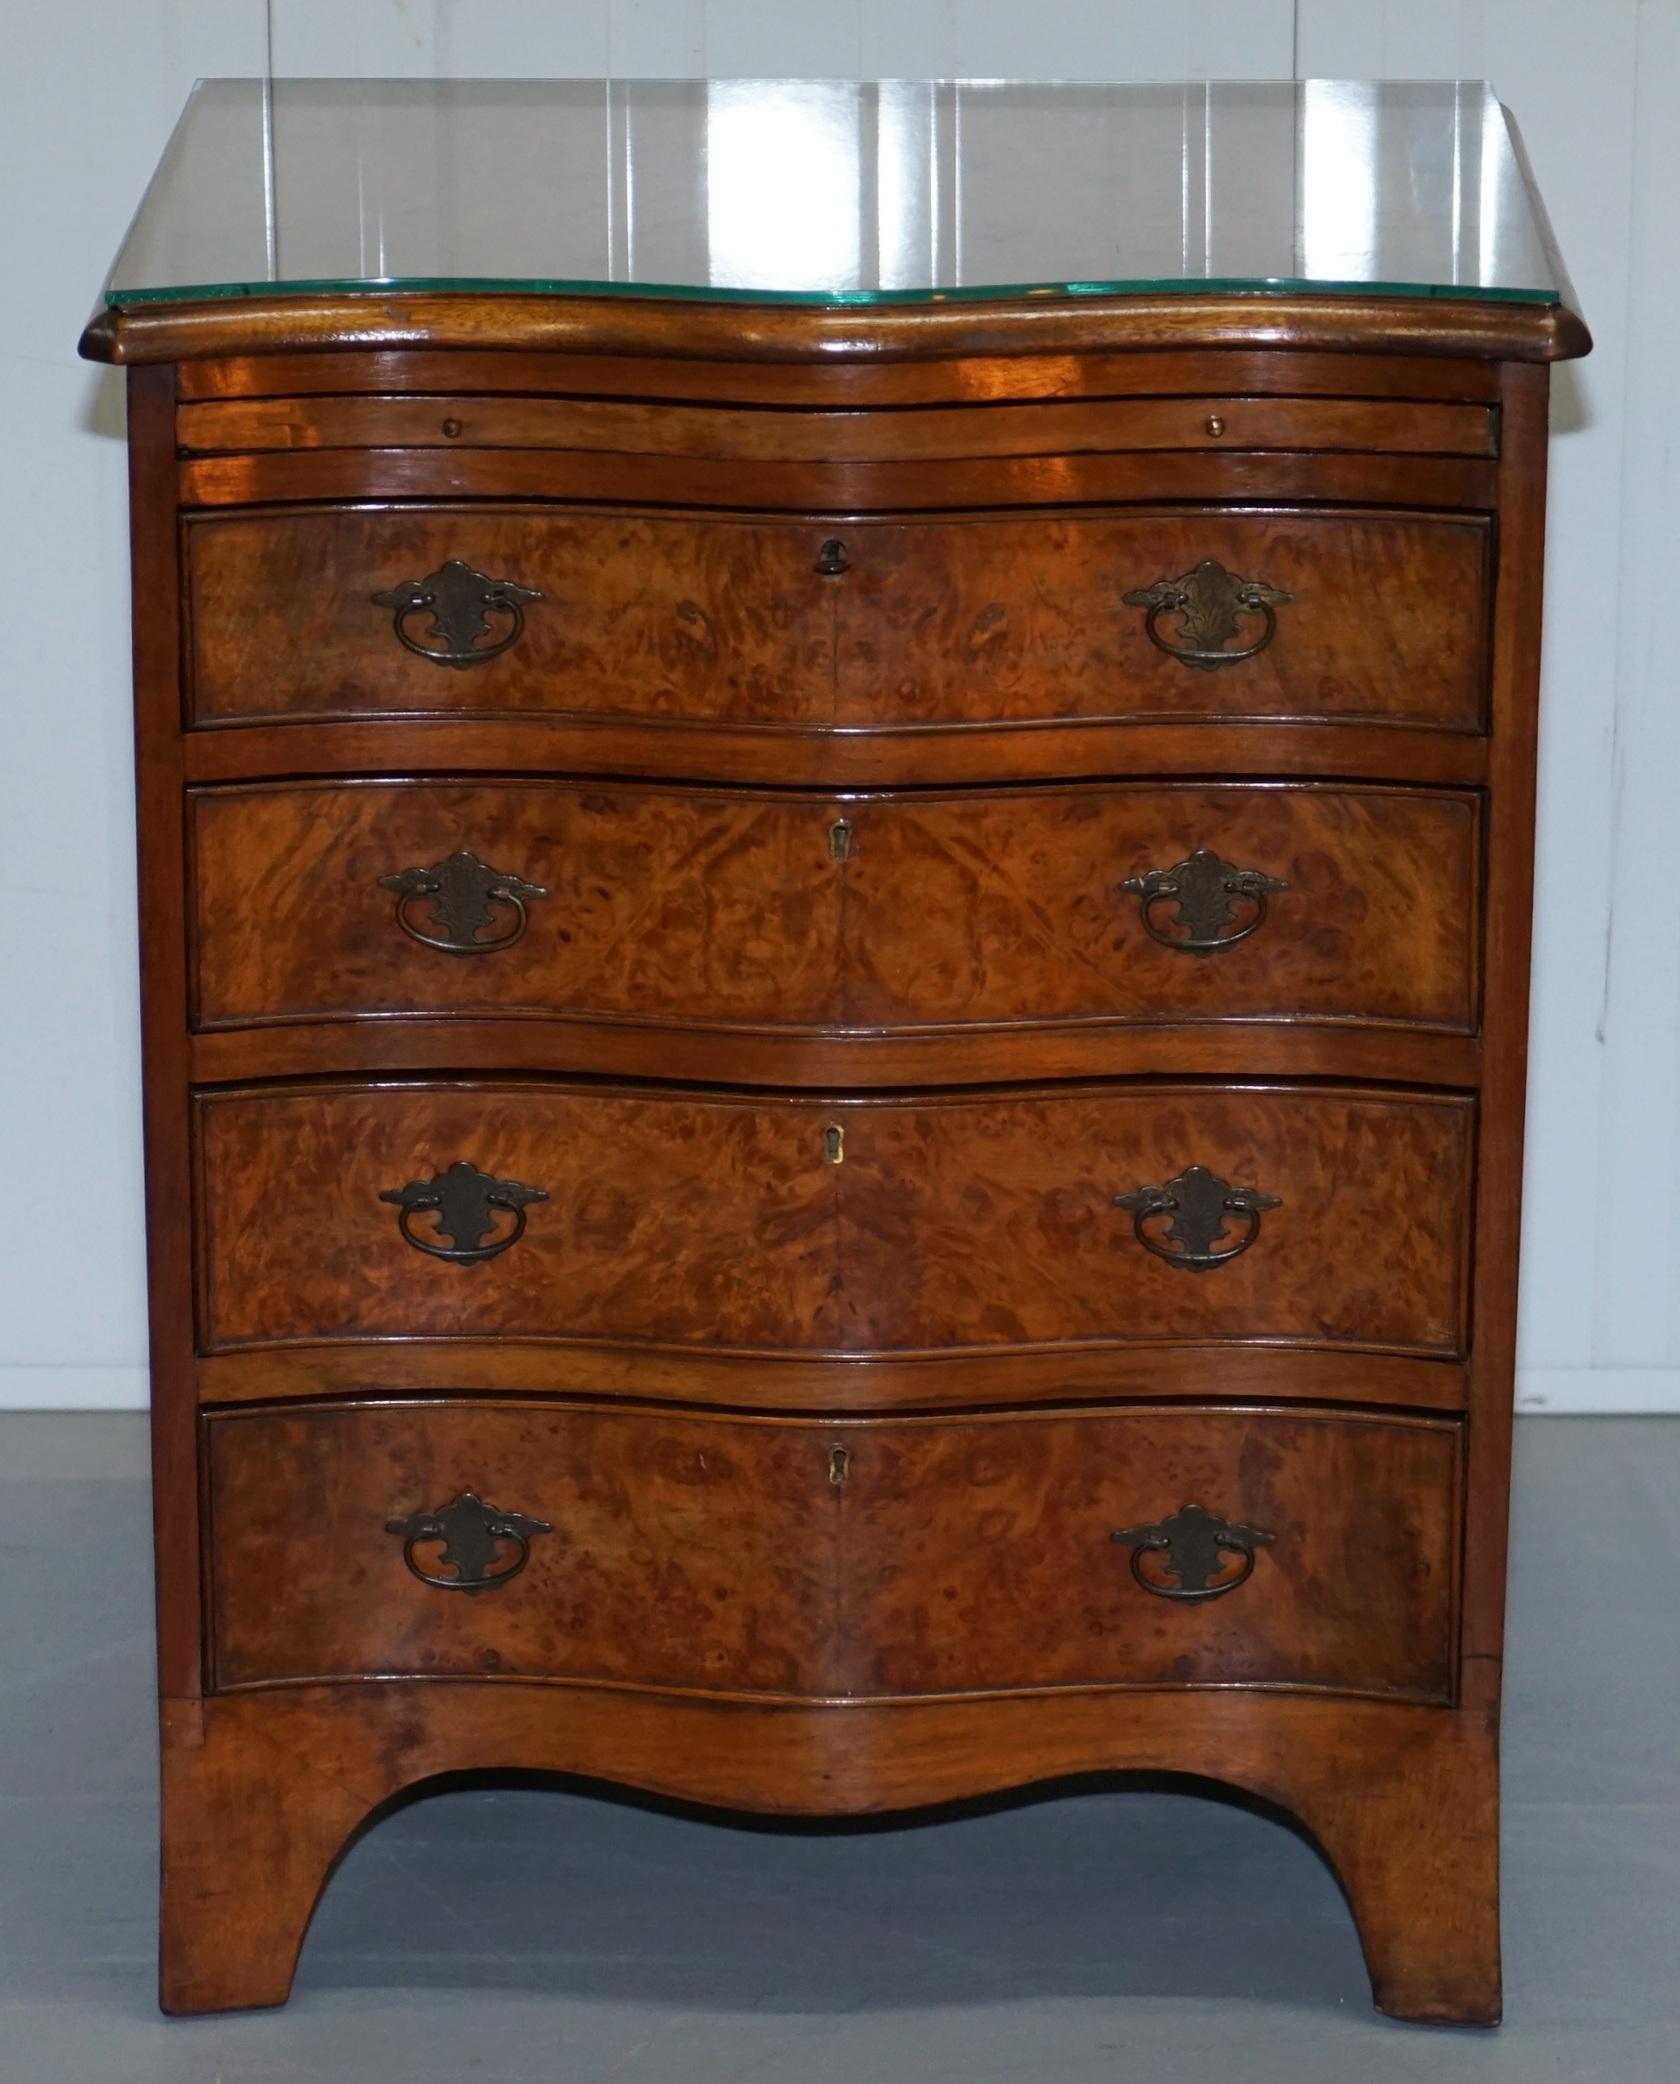 We are delighted to offer for sale this lovely Vintage hand made in England Burr Walnut wood chest of drawers in the Georgian manor with butlers serving tray

A very good looking and well-made piece, sized as to be a side or occasional table next